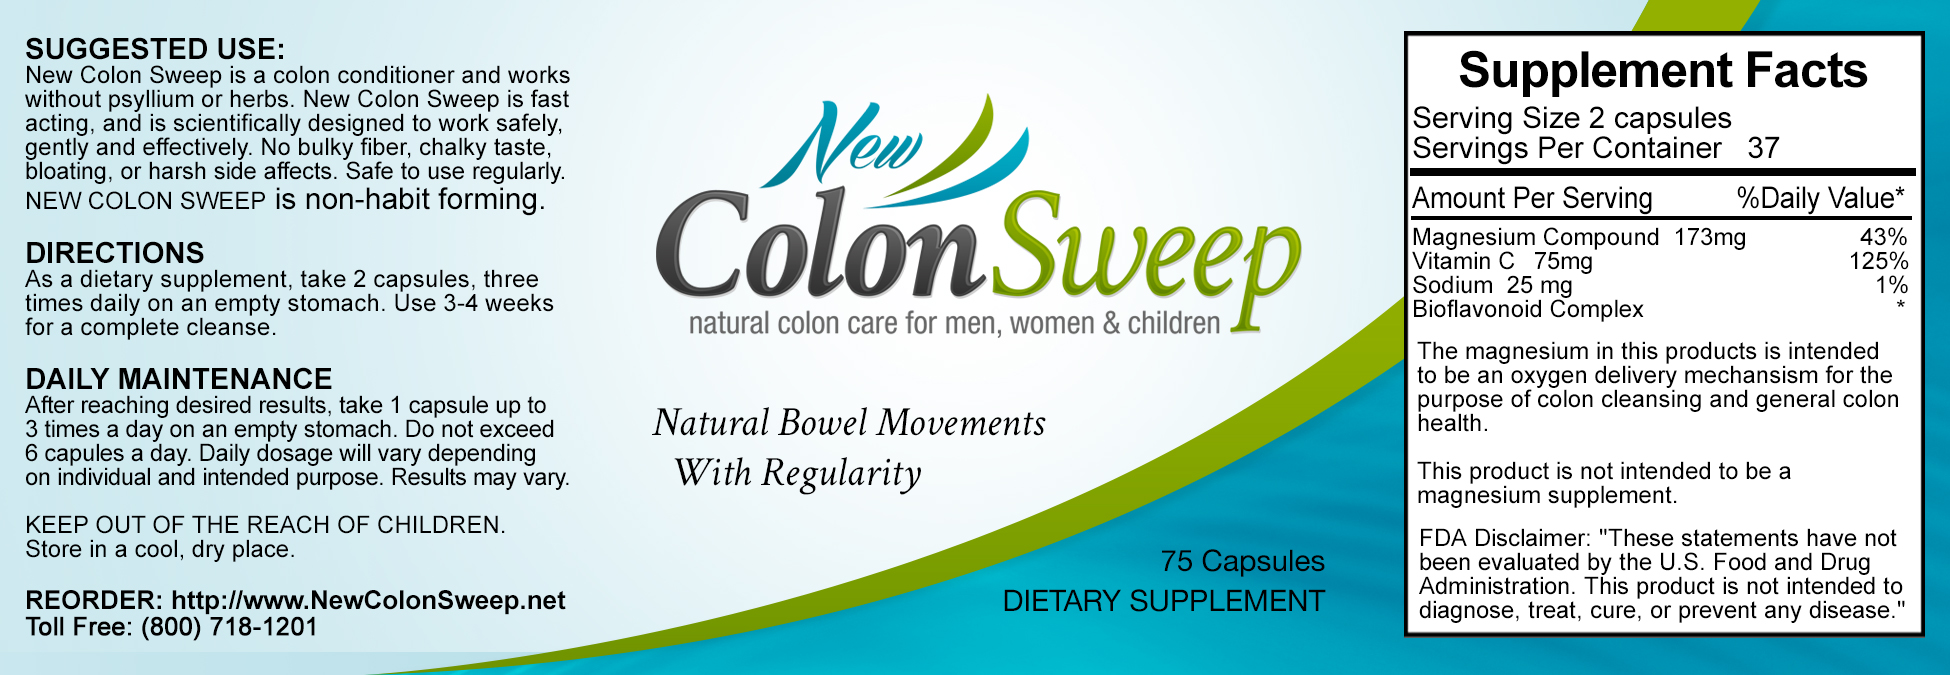 newcolonsweep-label